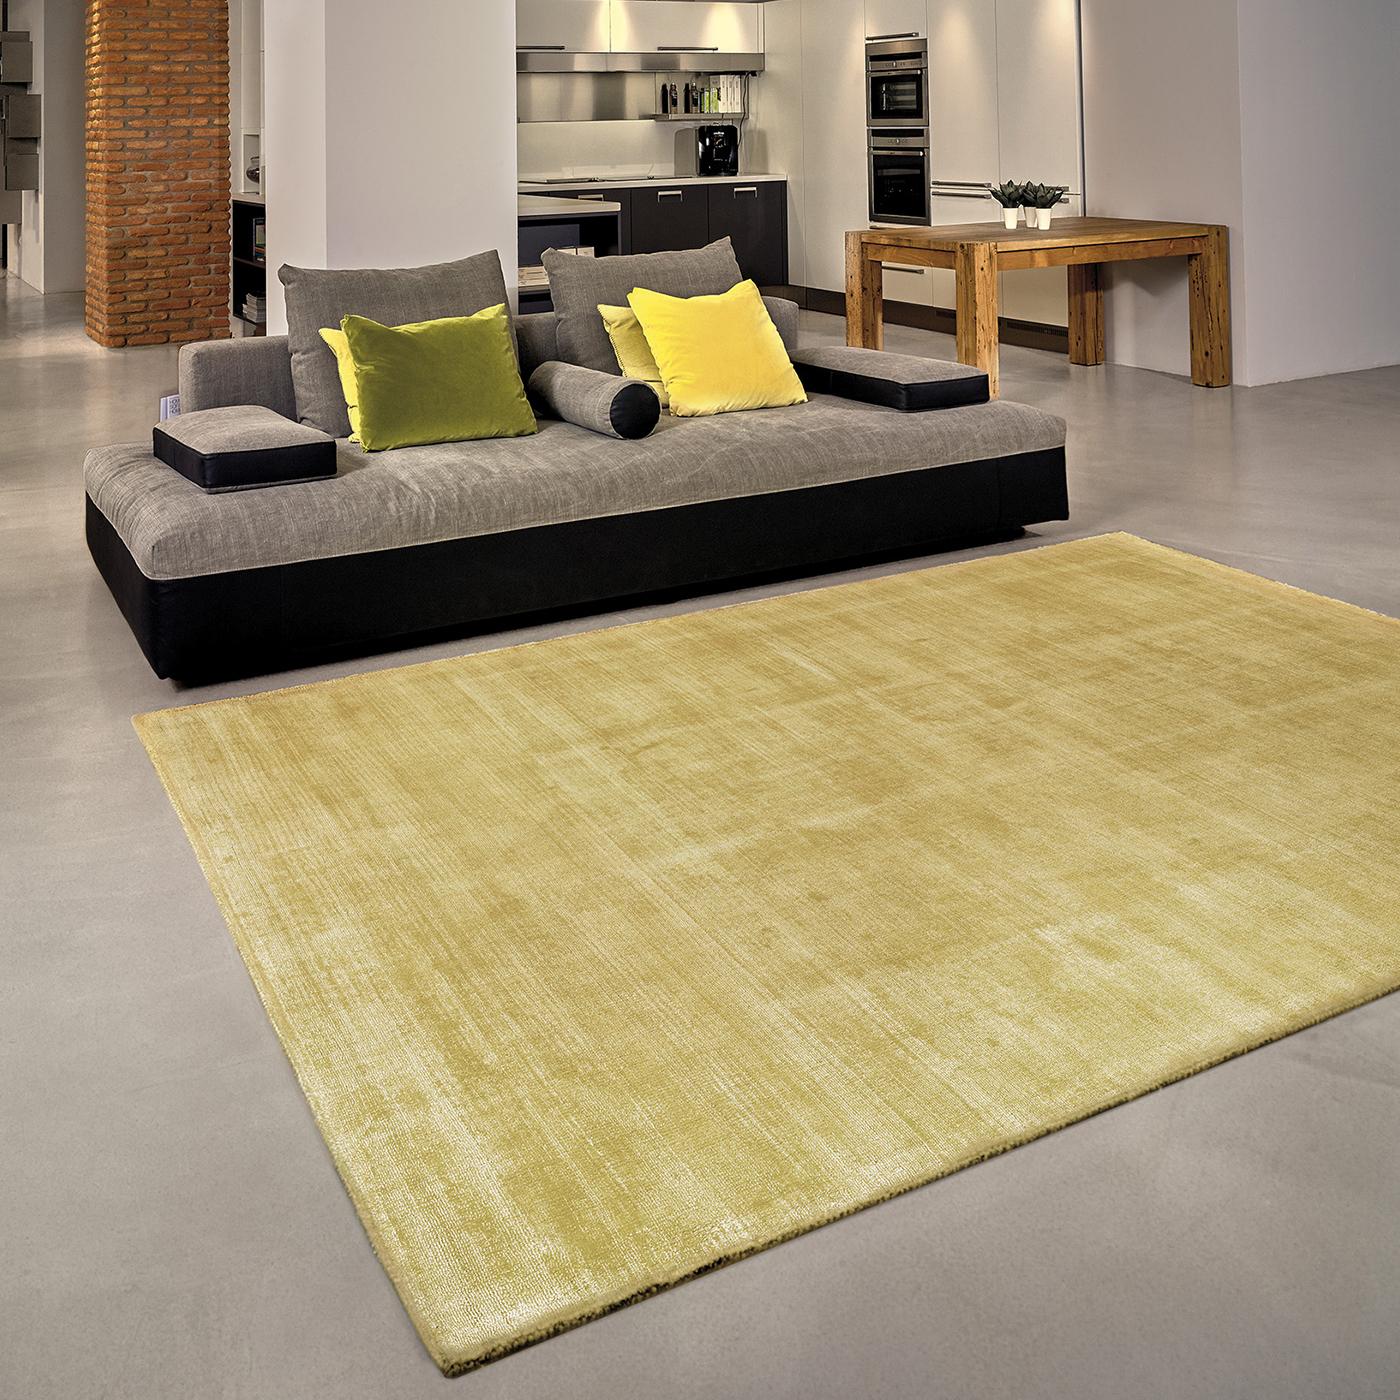 Eclectic, bold and bright, the Trendy Shiny 70 V is the perfect solution if you are looking for a solid-colored rug with a big personality. It takes pride of place in the bedroom, living room or dining area. Its unique texture and lustrous sheen